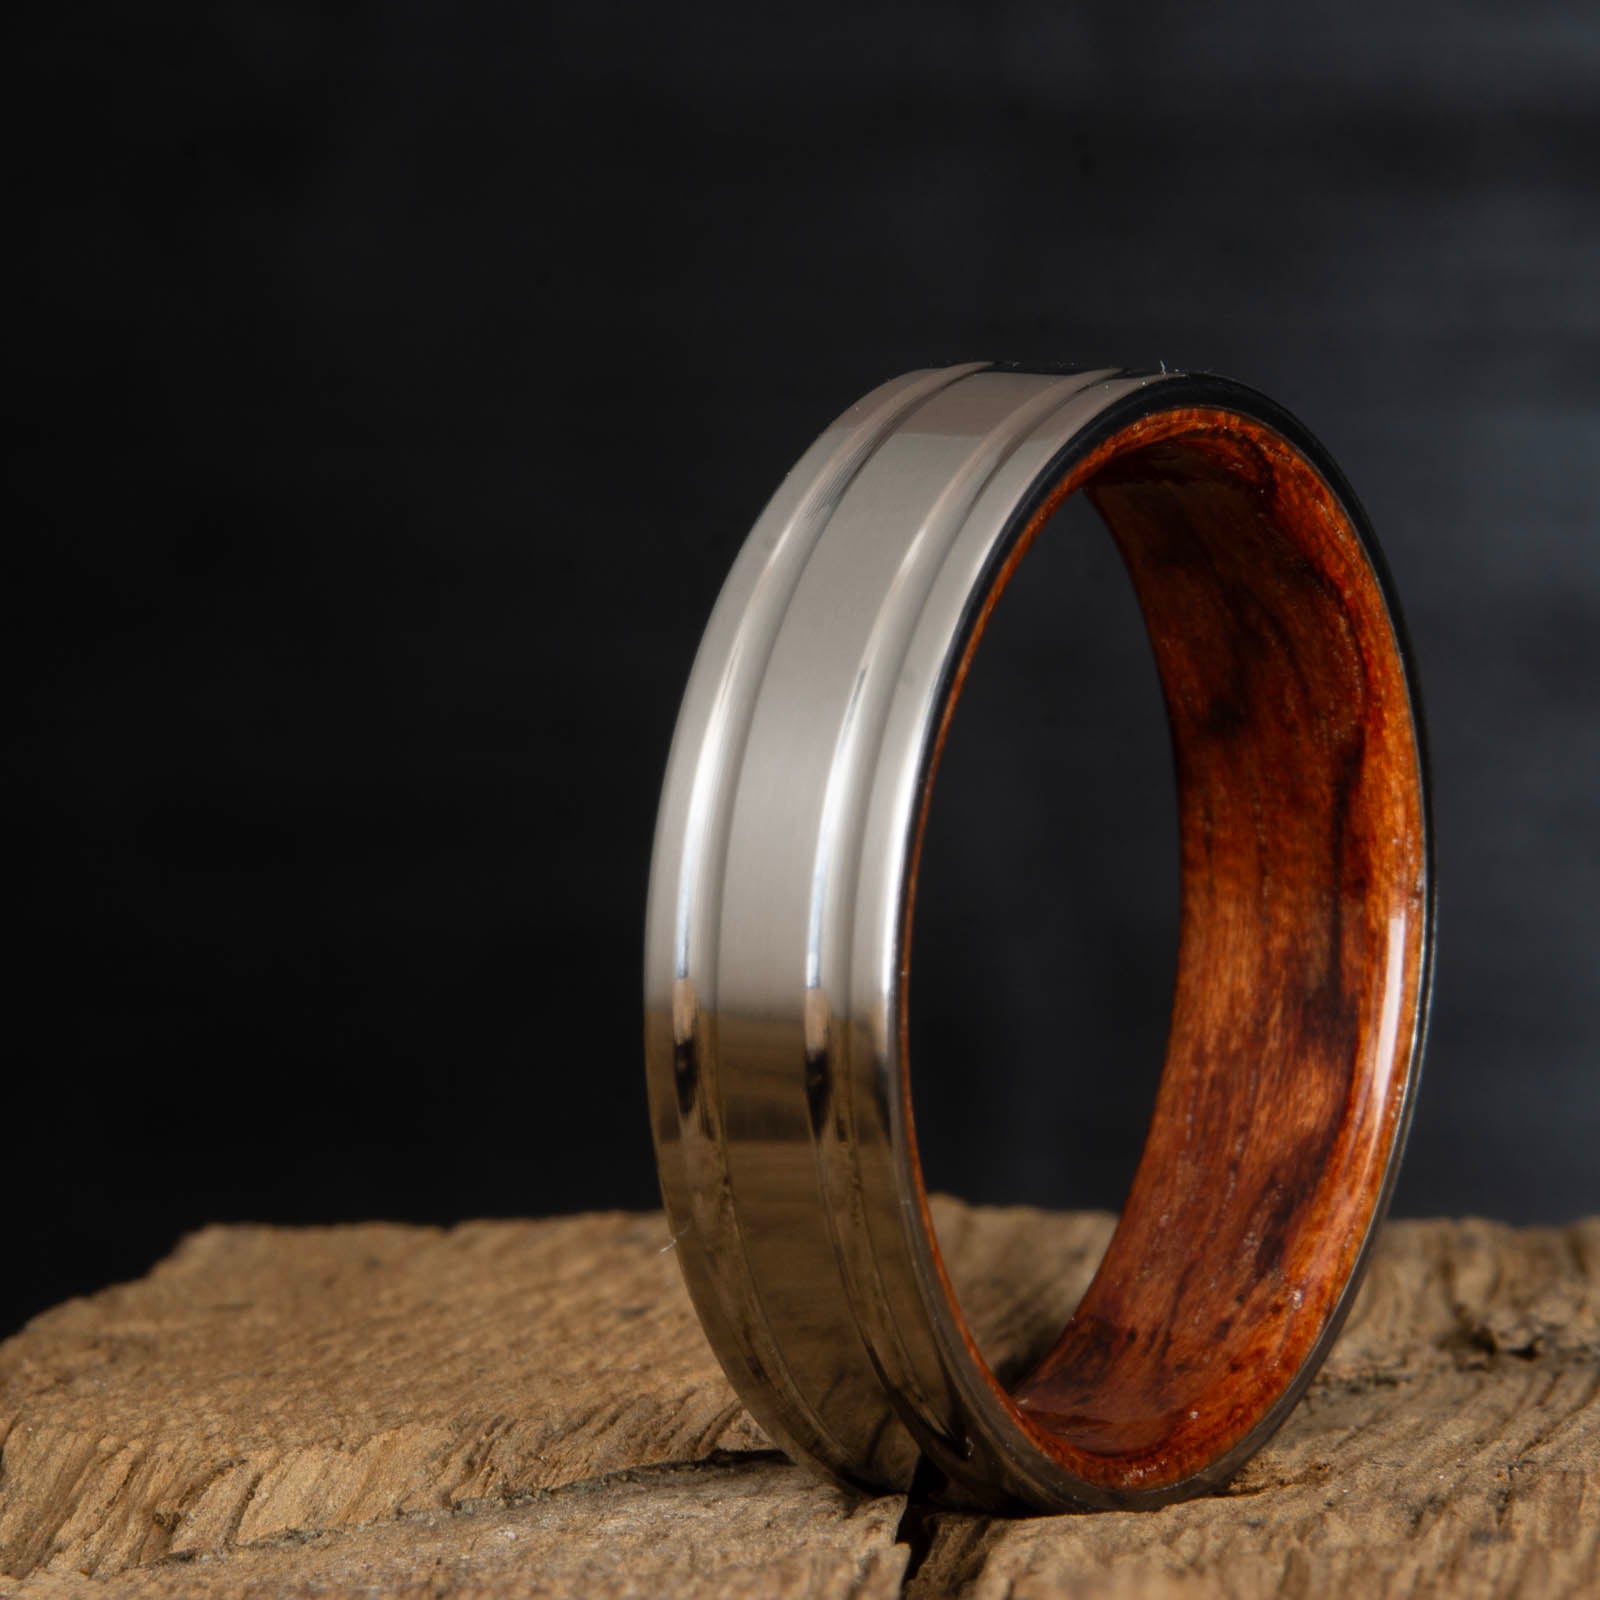 Double Grooved Satin Titanium and Bubinga Wood Ring 5mm / 5-14 whole-half-quarter-available-enter in Notes During Checkout